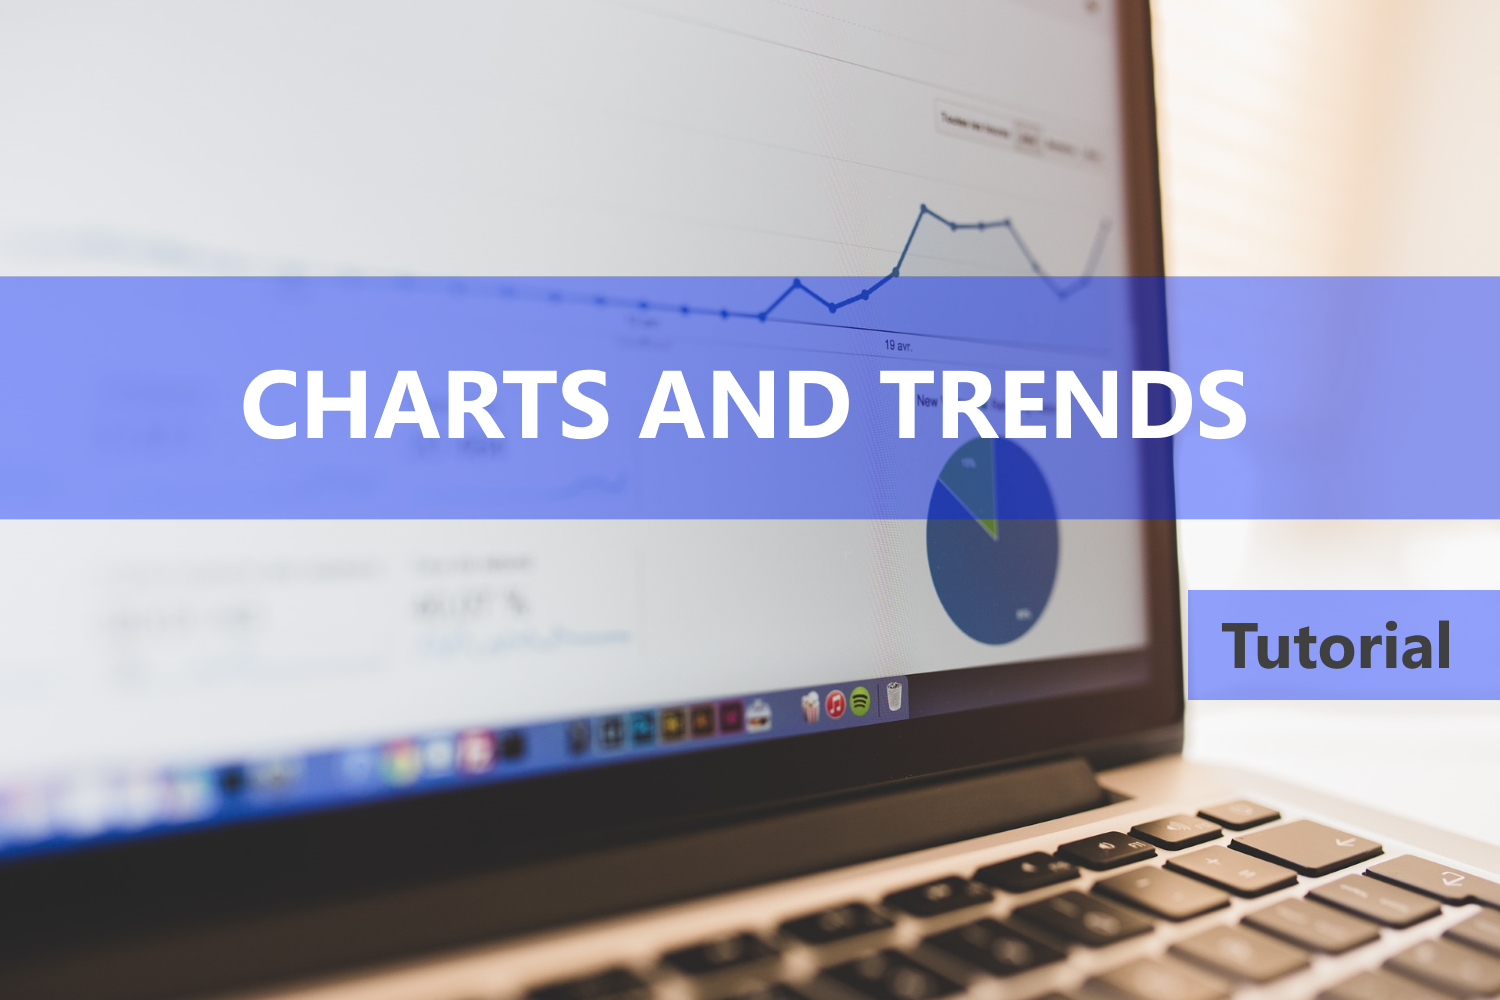 This tutorial provides specific information about charts and trends needed for profitable online stock trading.